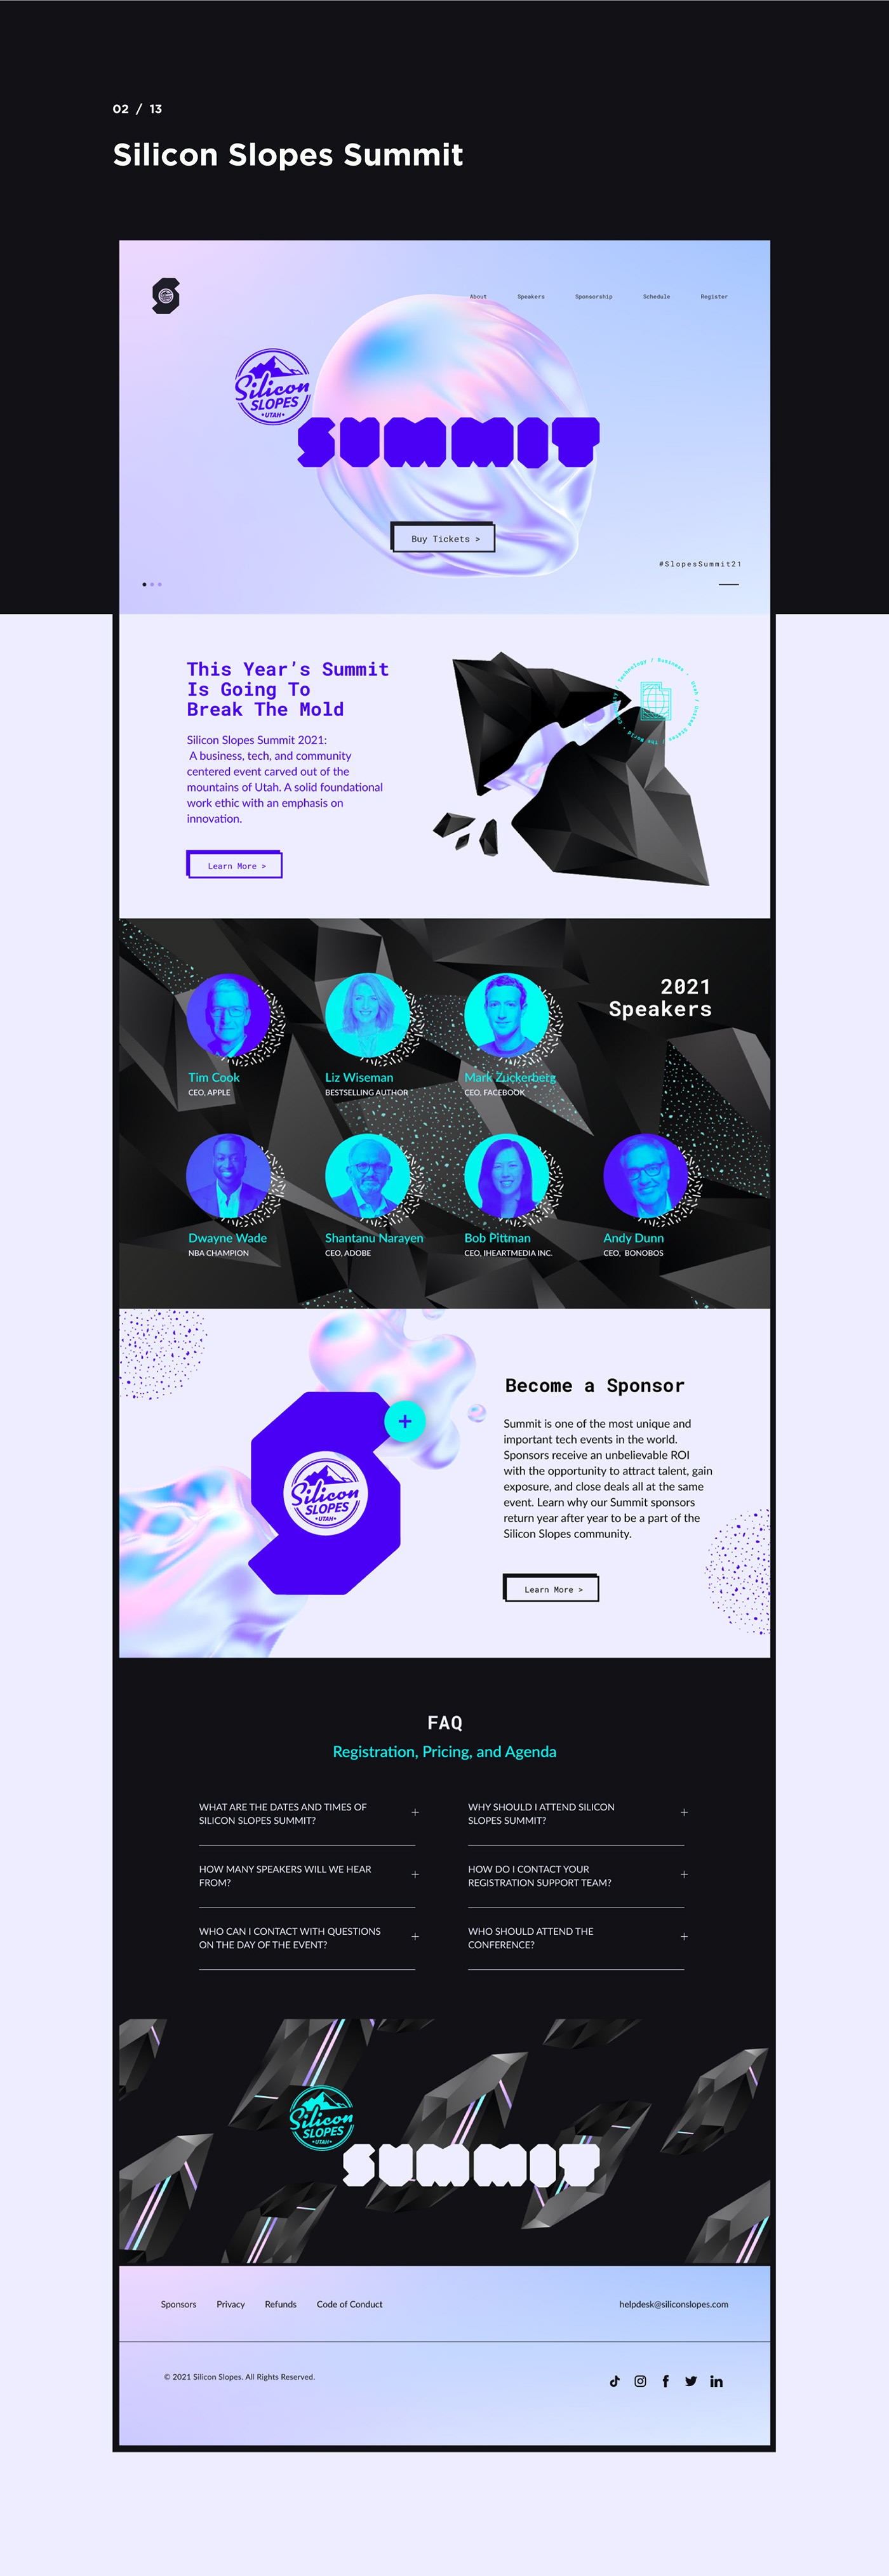 Adobe XD brand identity Figma landing page UI/UX user interface Website Website Design pillow cube Silicon Slopes Summit